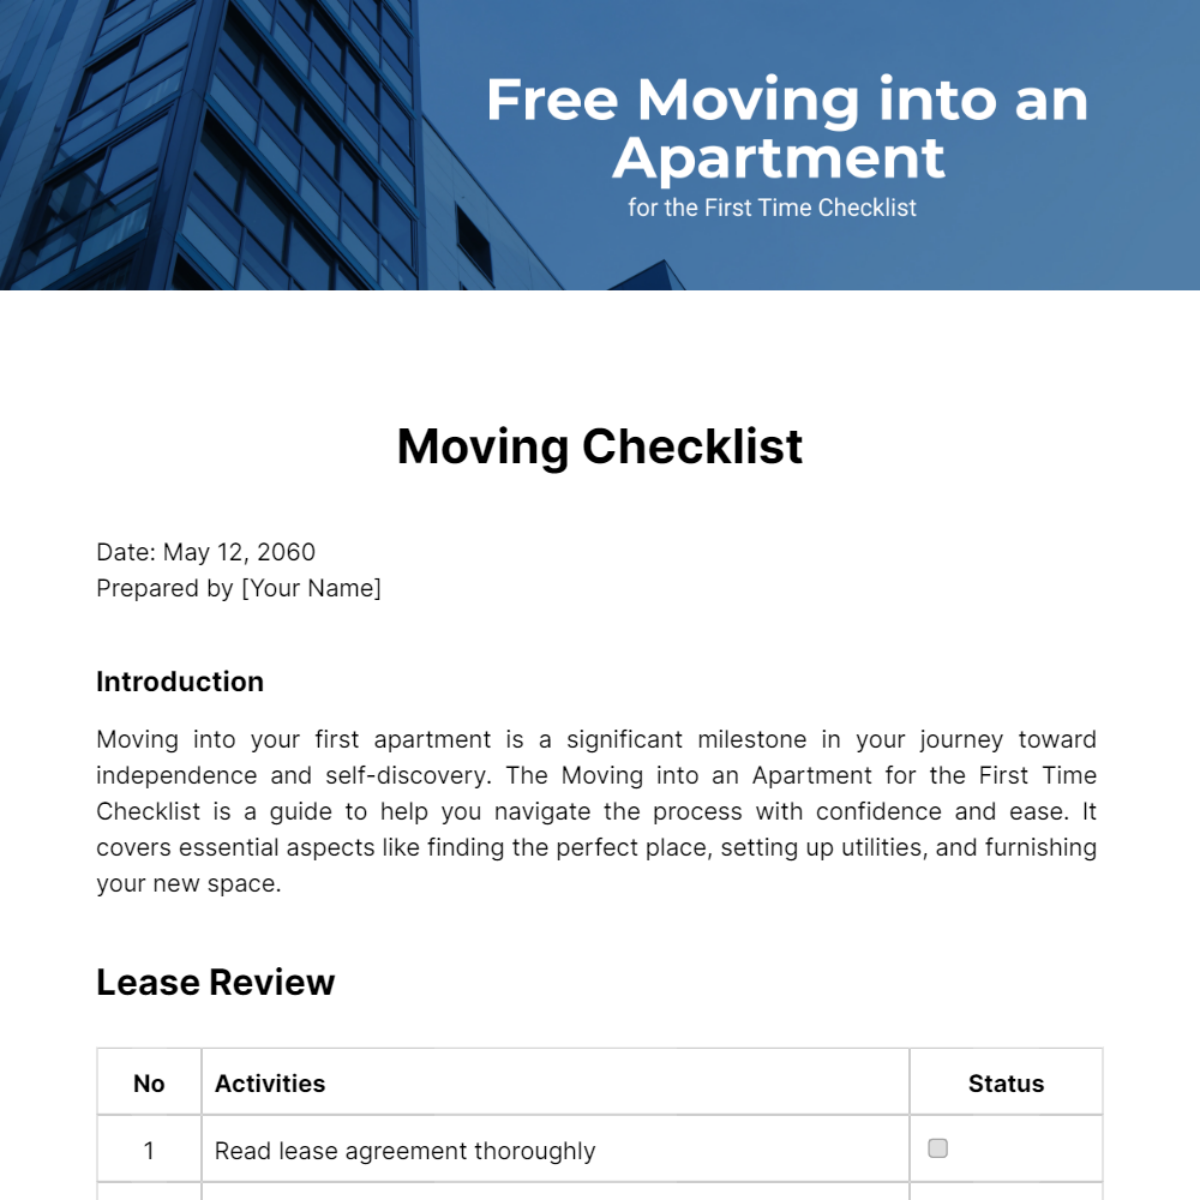 Moving into an Apartment for the First Time Checklist  Template